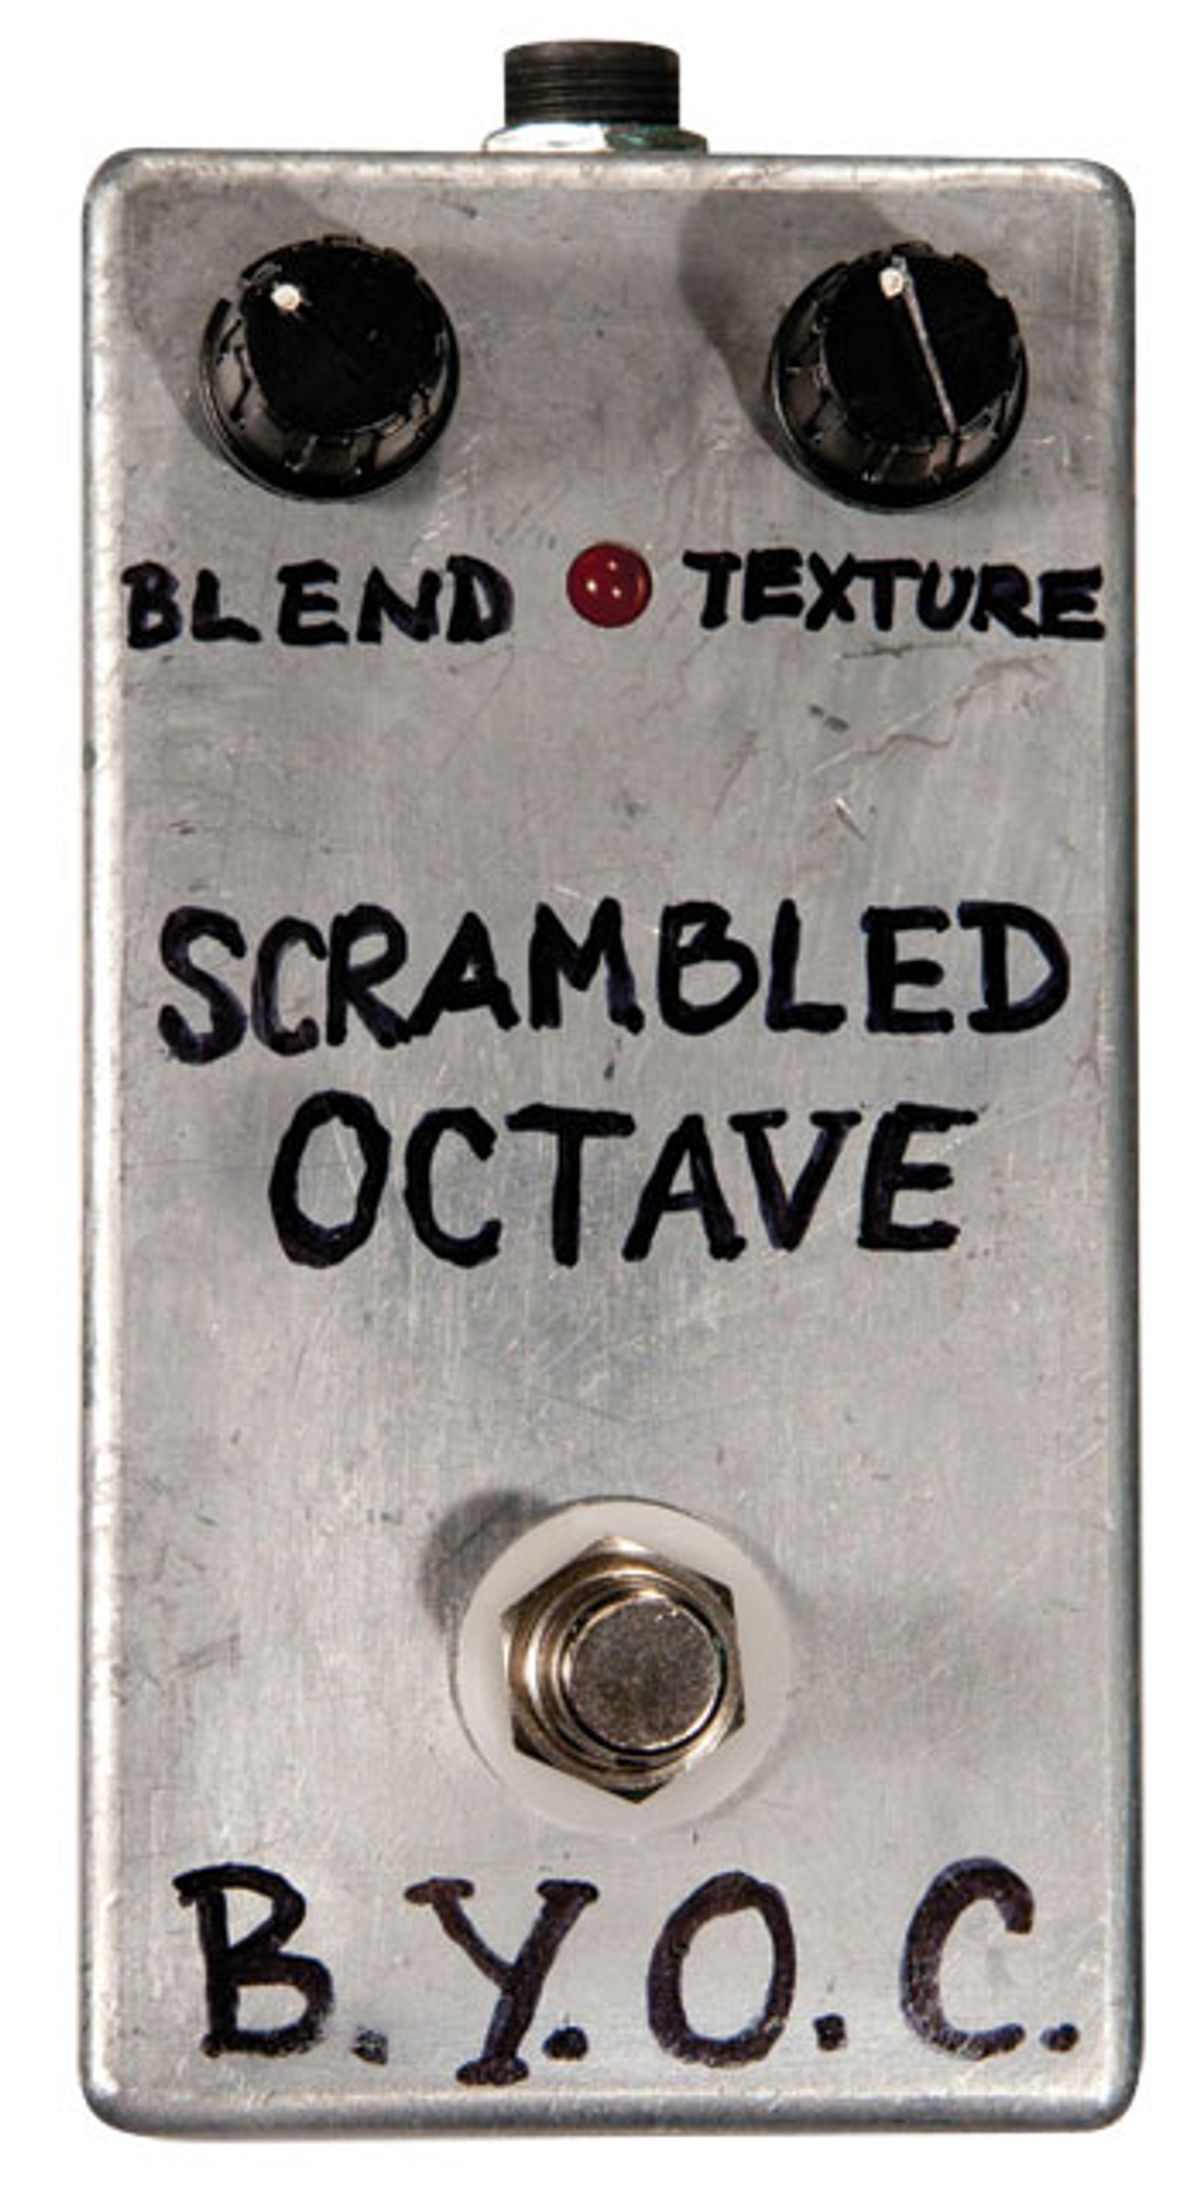 Build Your Own Clone Scrambled Octave Pedal Review